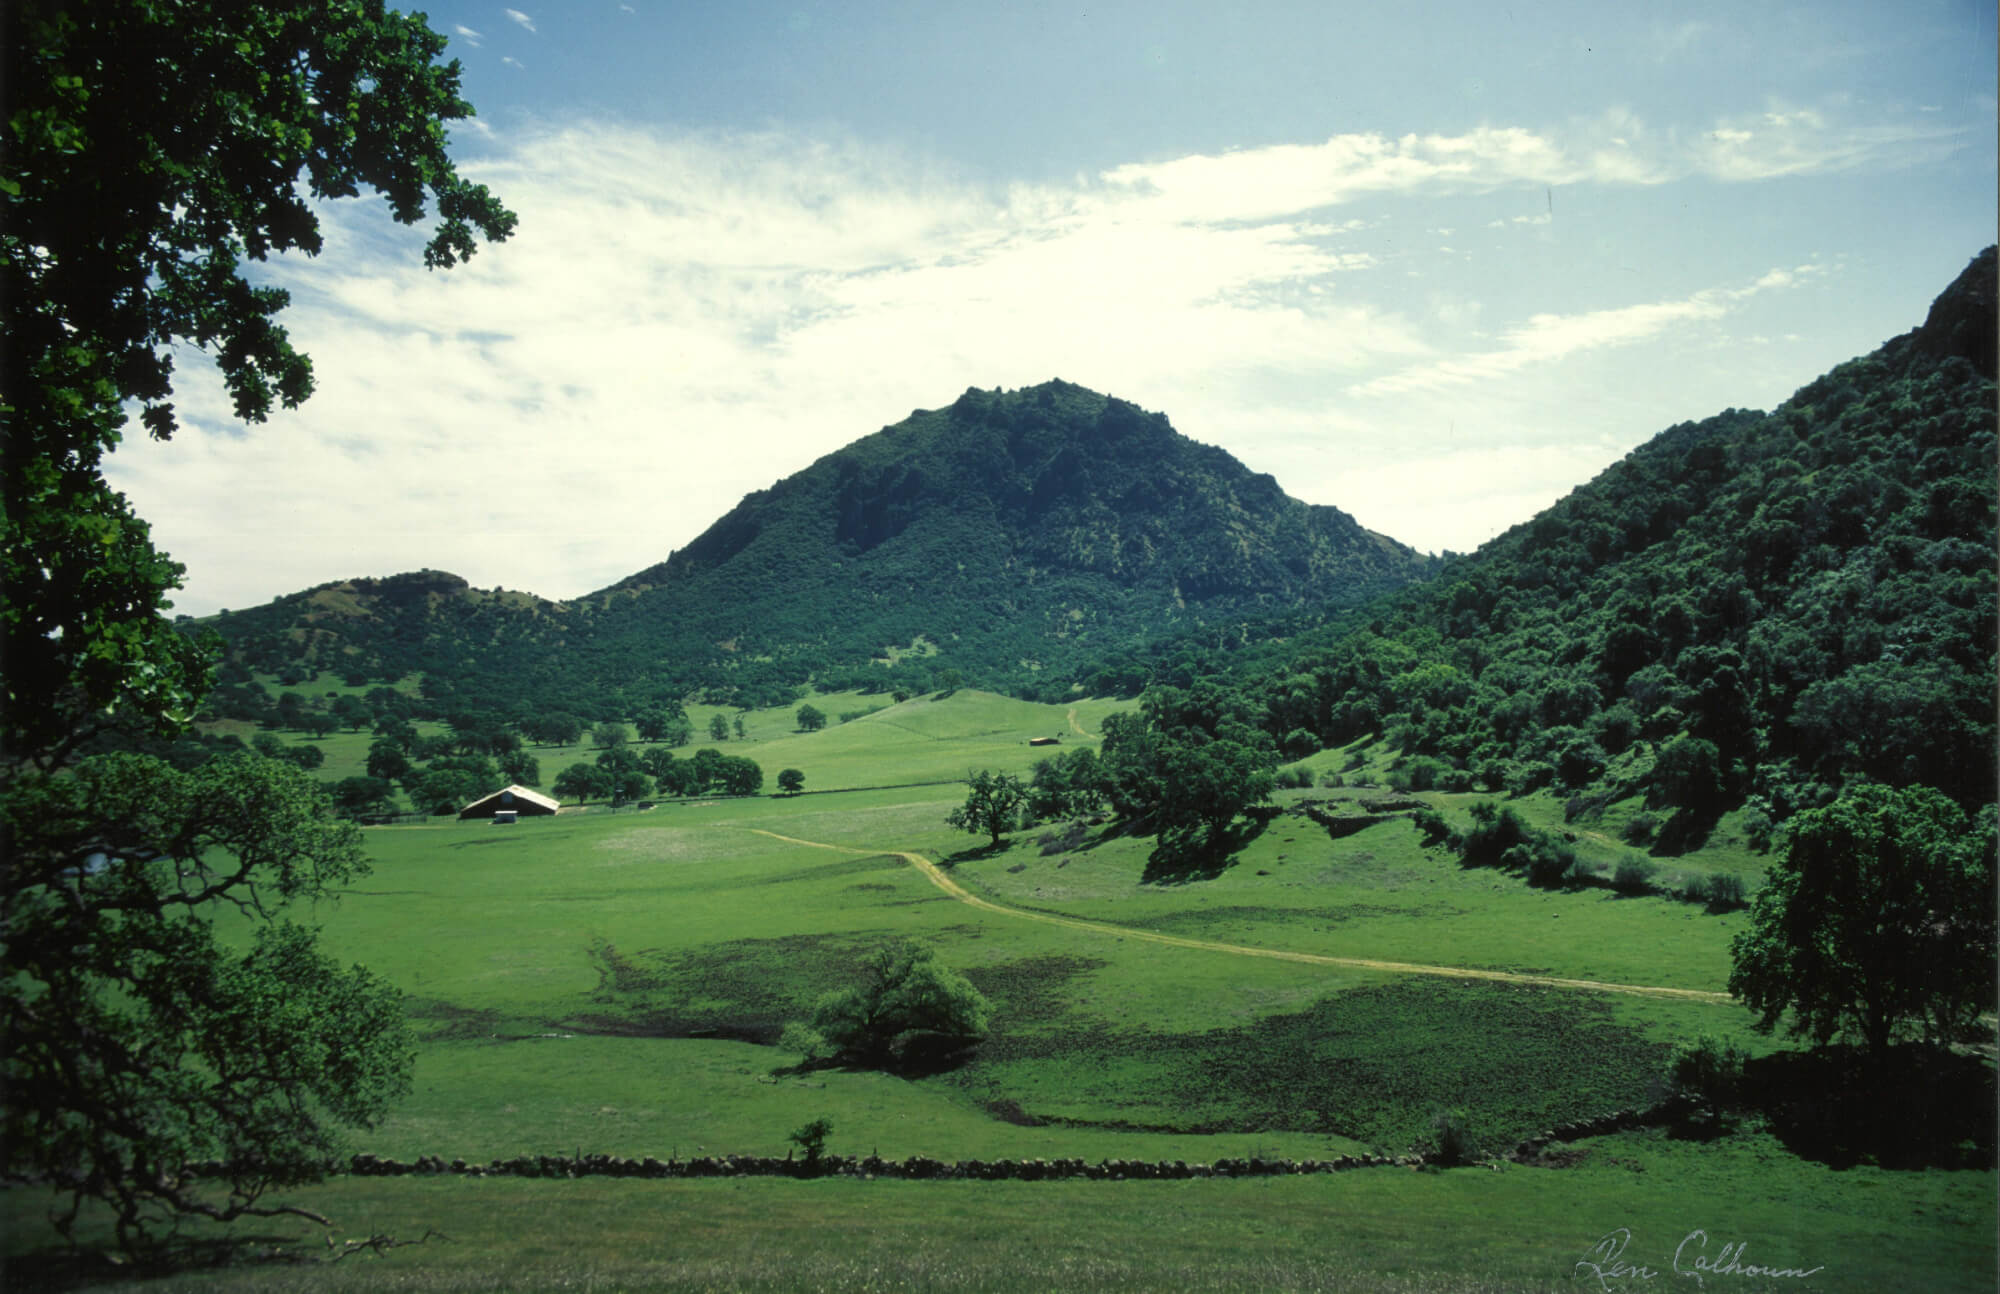 Image of a beautiful mountain amongst trees and grass